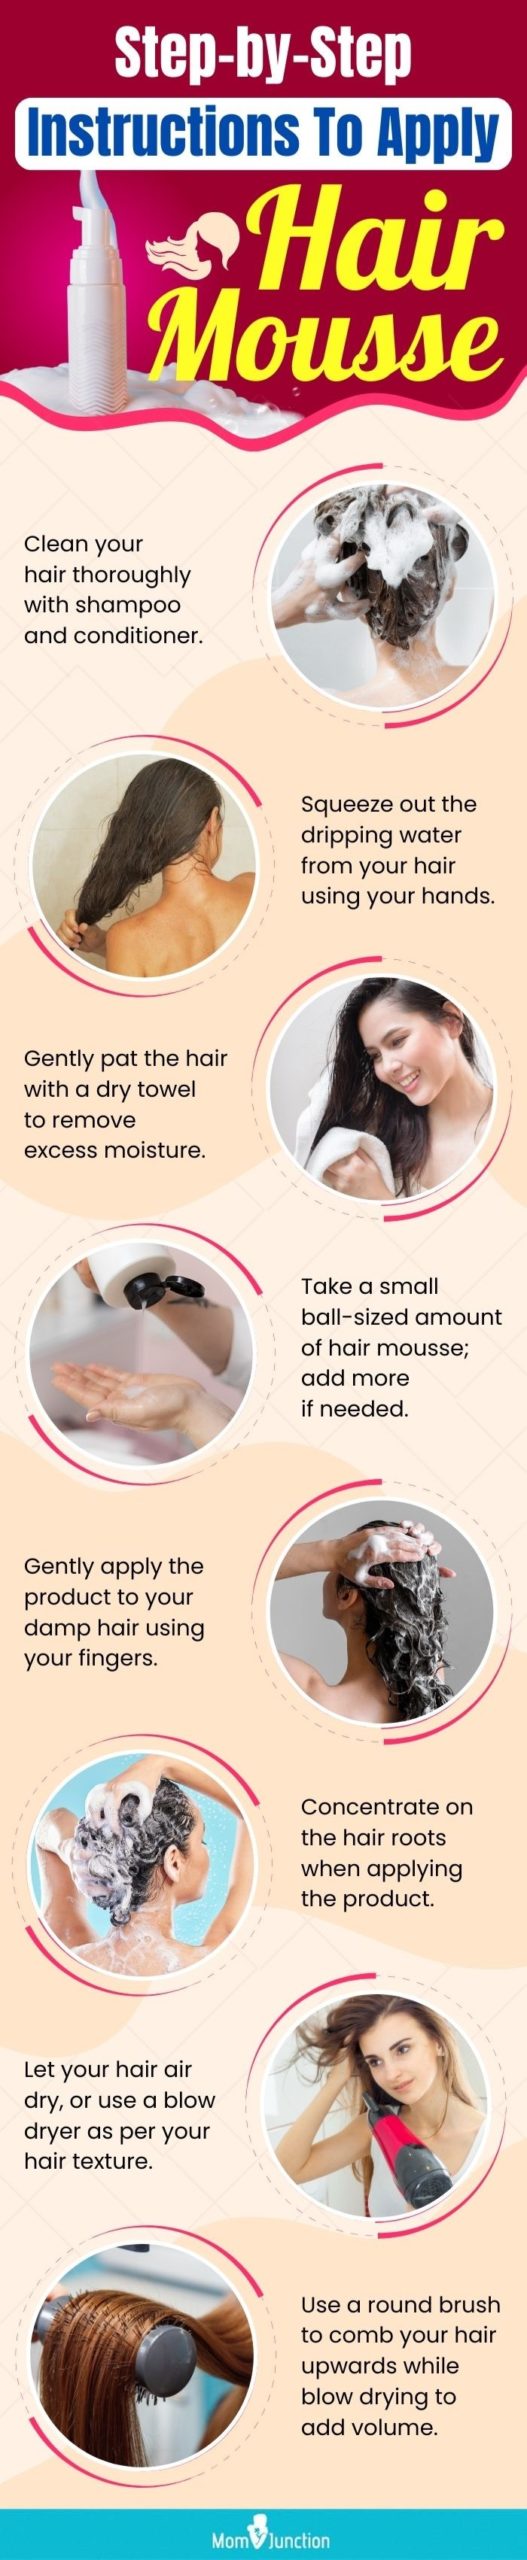 Step-by-Step Instructions To Apply Hair Mousse (infographic)